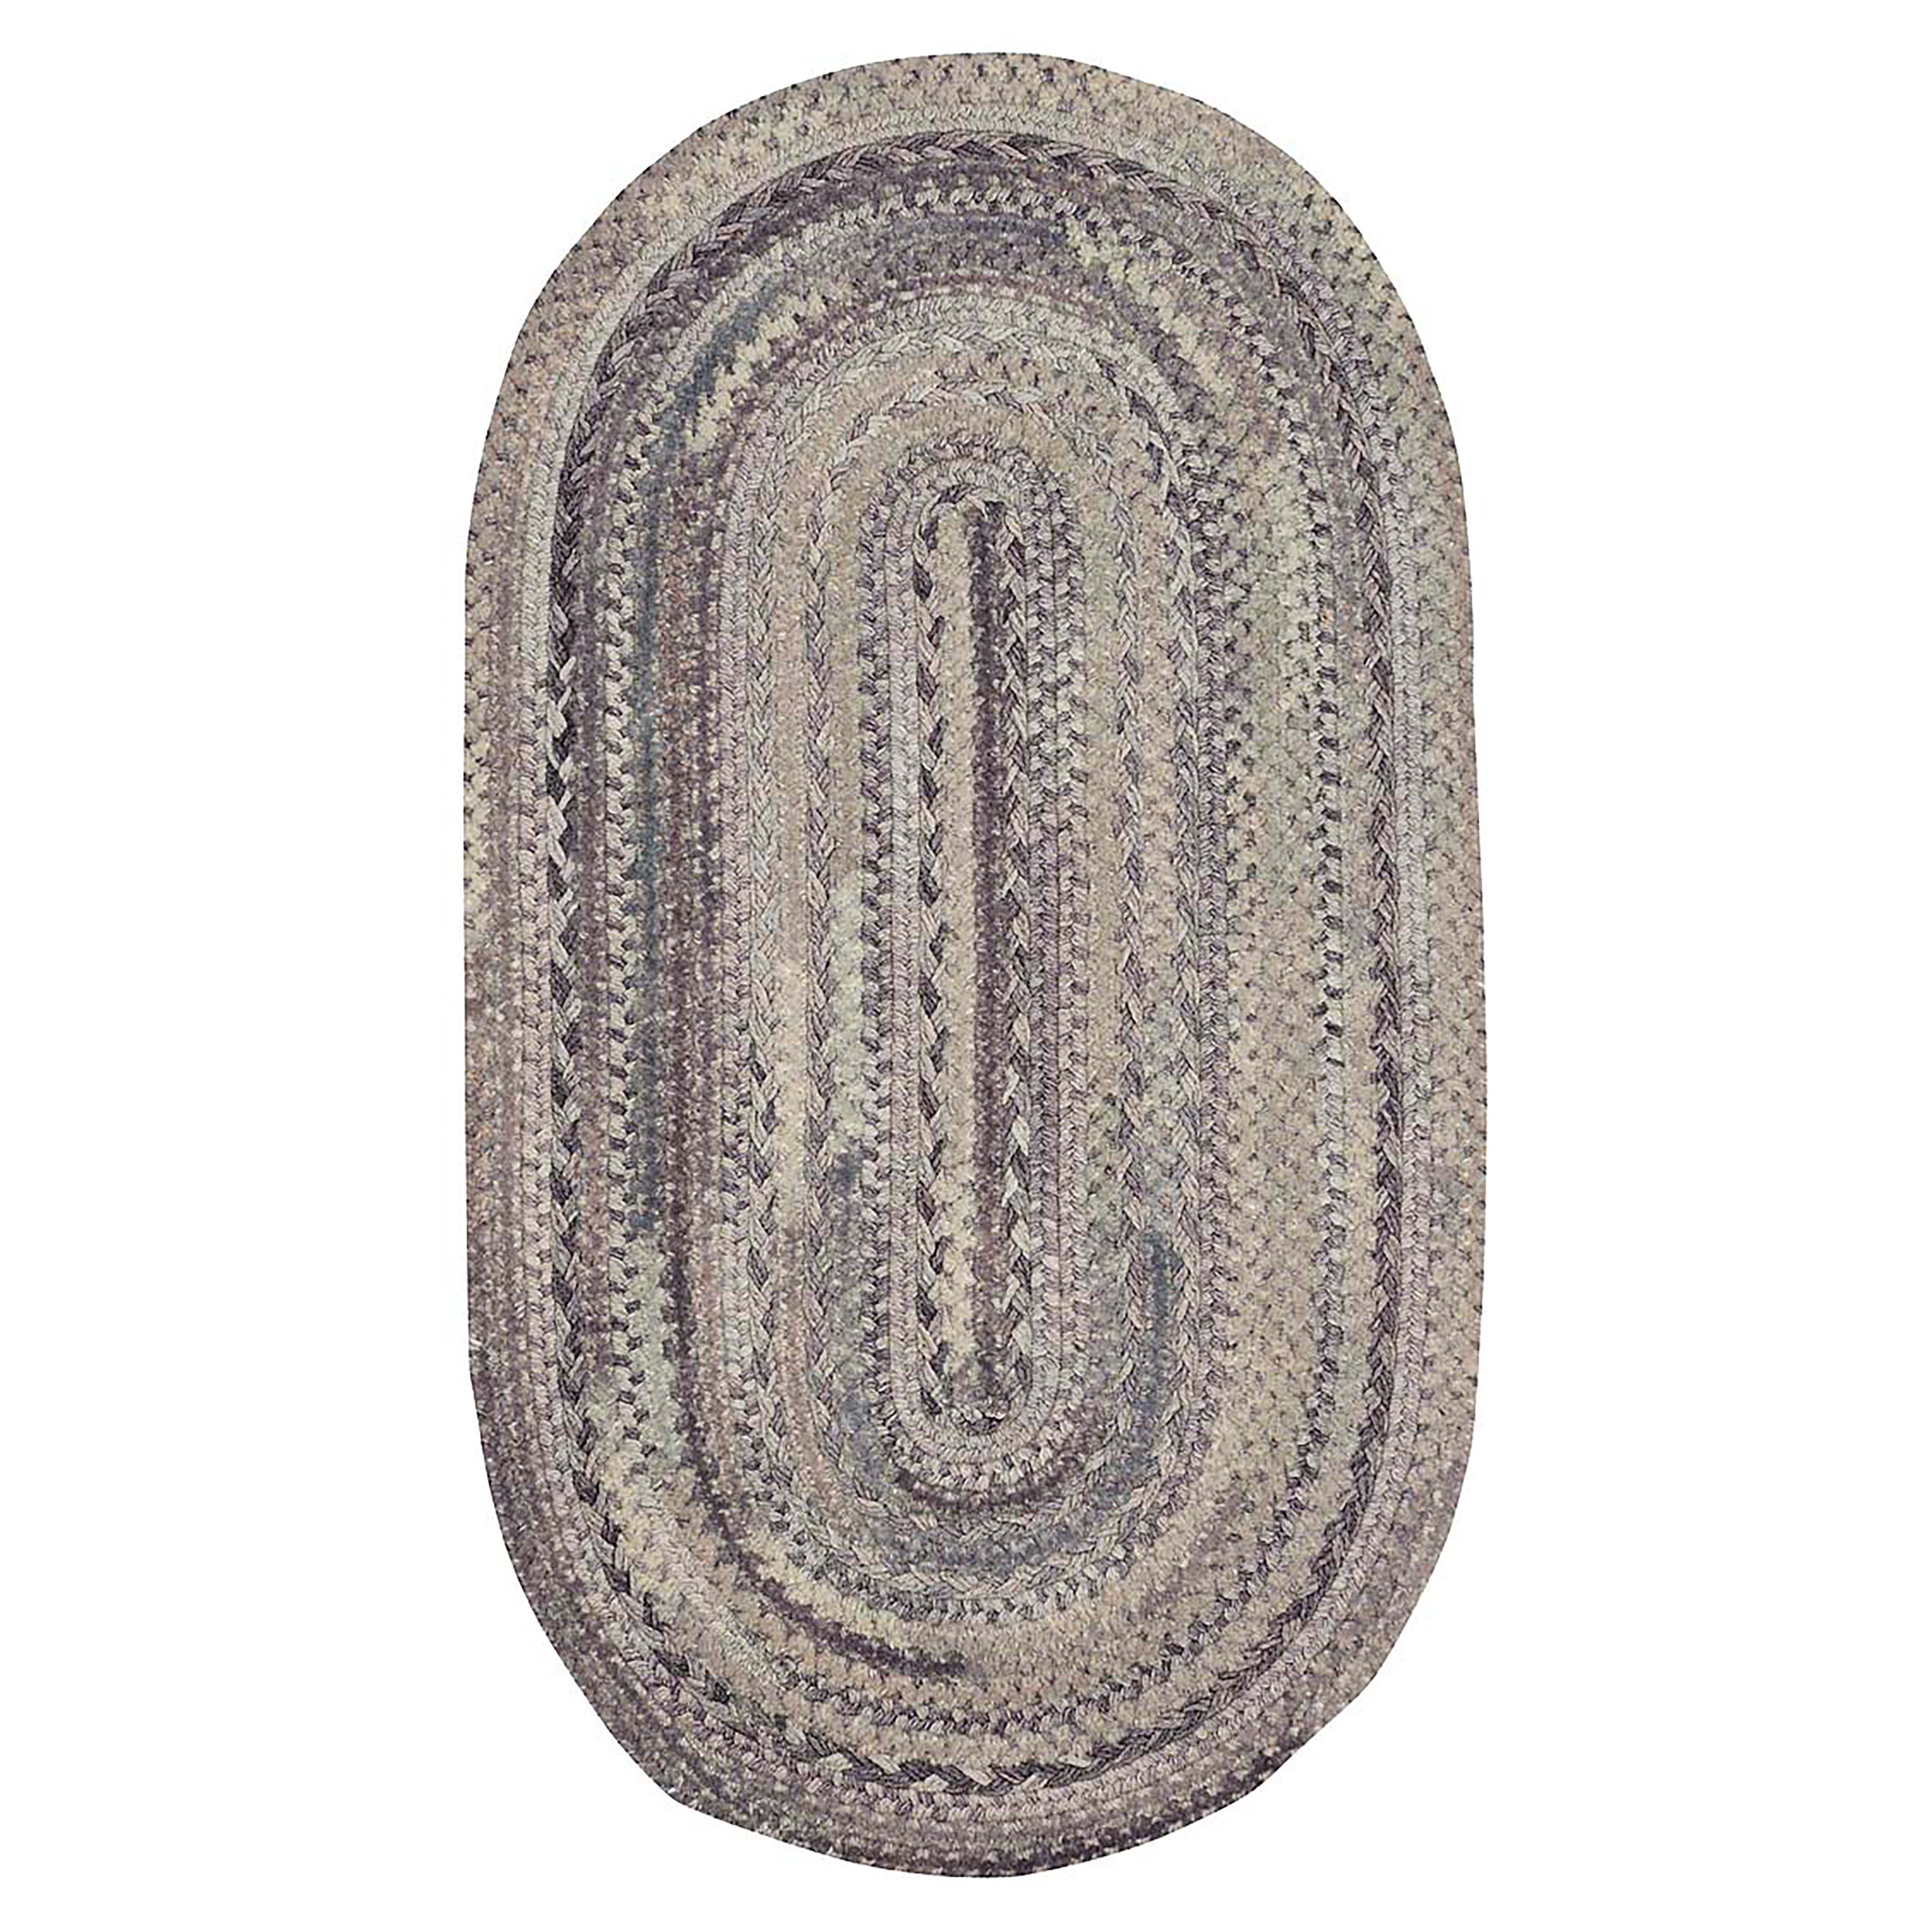 Image of Oval Riverview Wool Blend Braided Rug, 5' x 8'